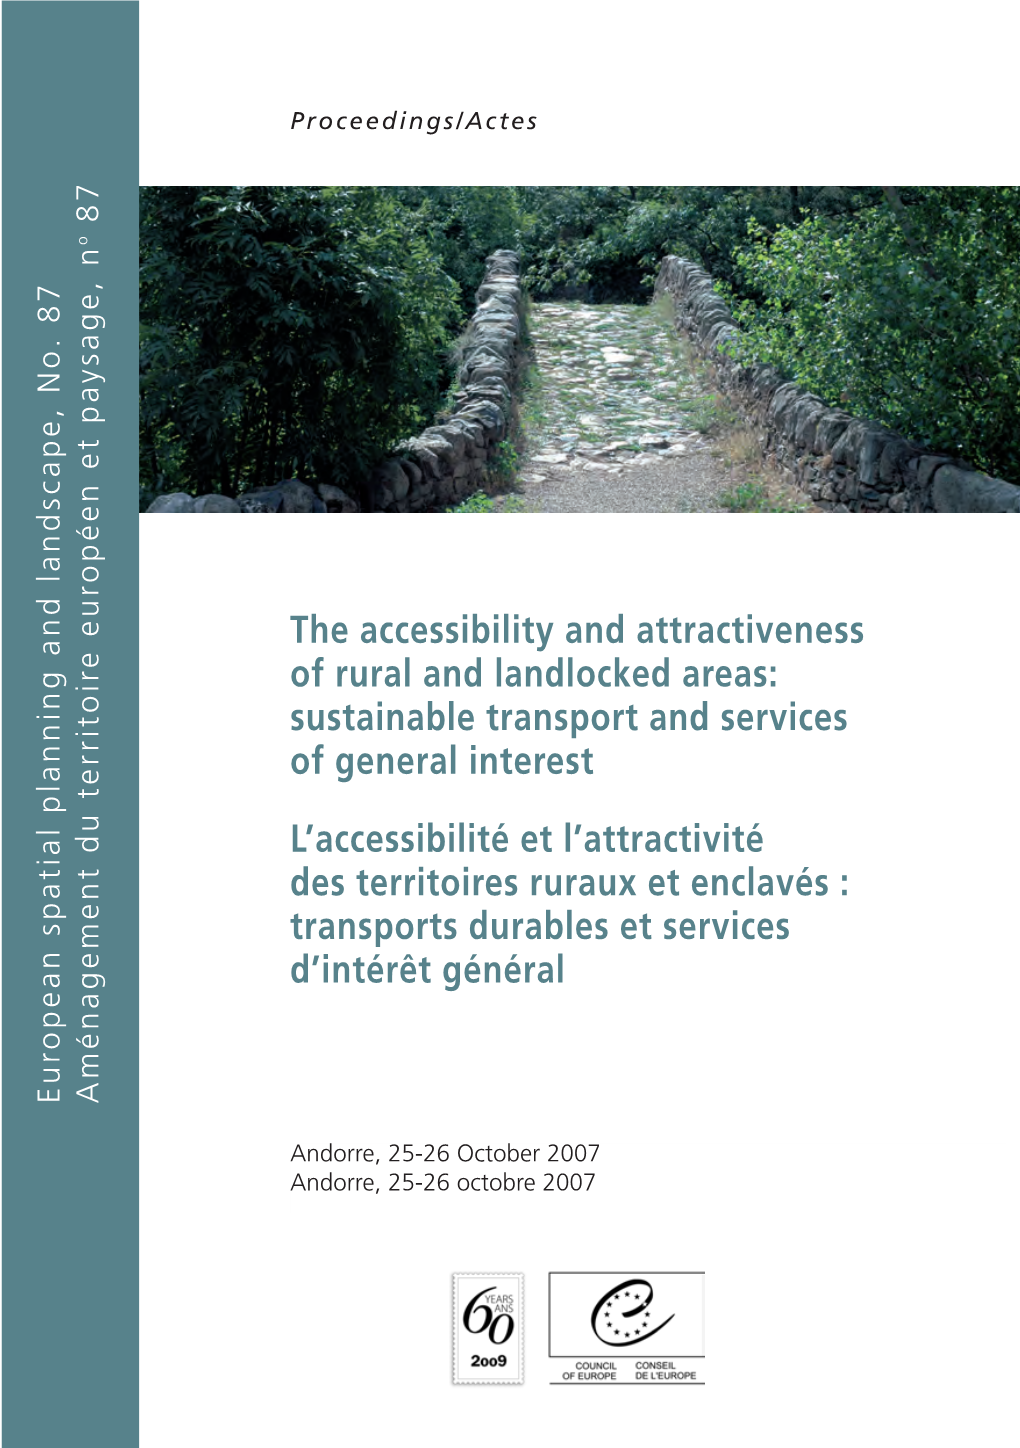 The Accessibility and Attractiveness of Rural and Landlocked Areas